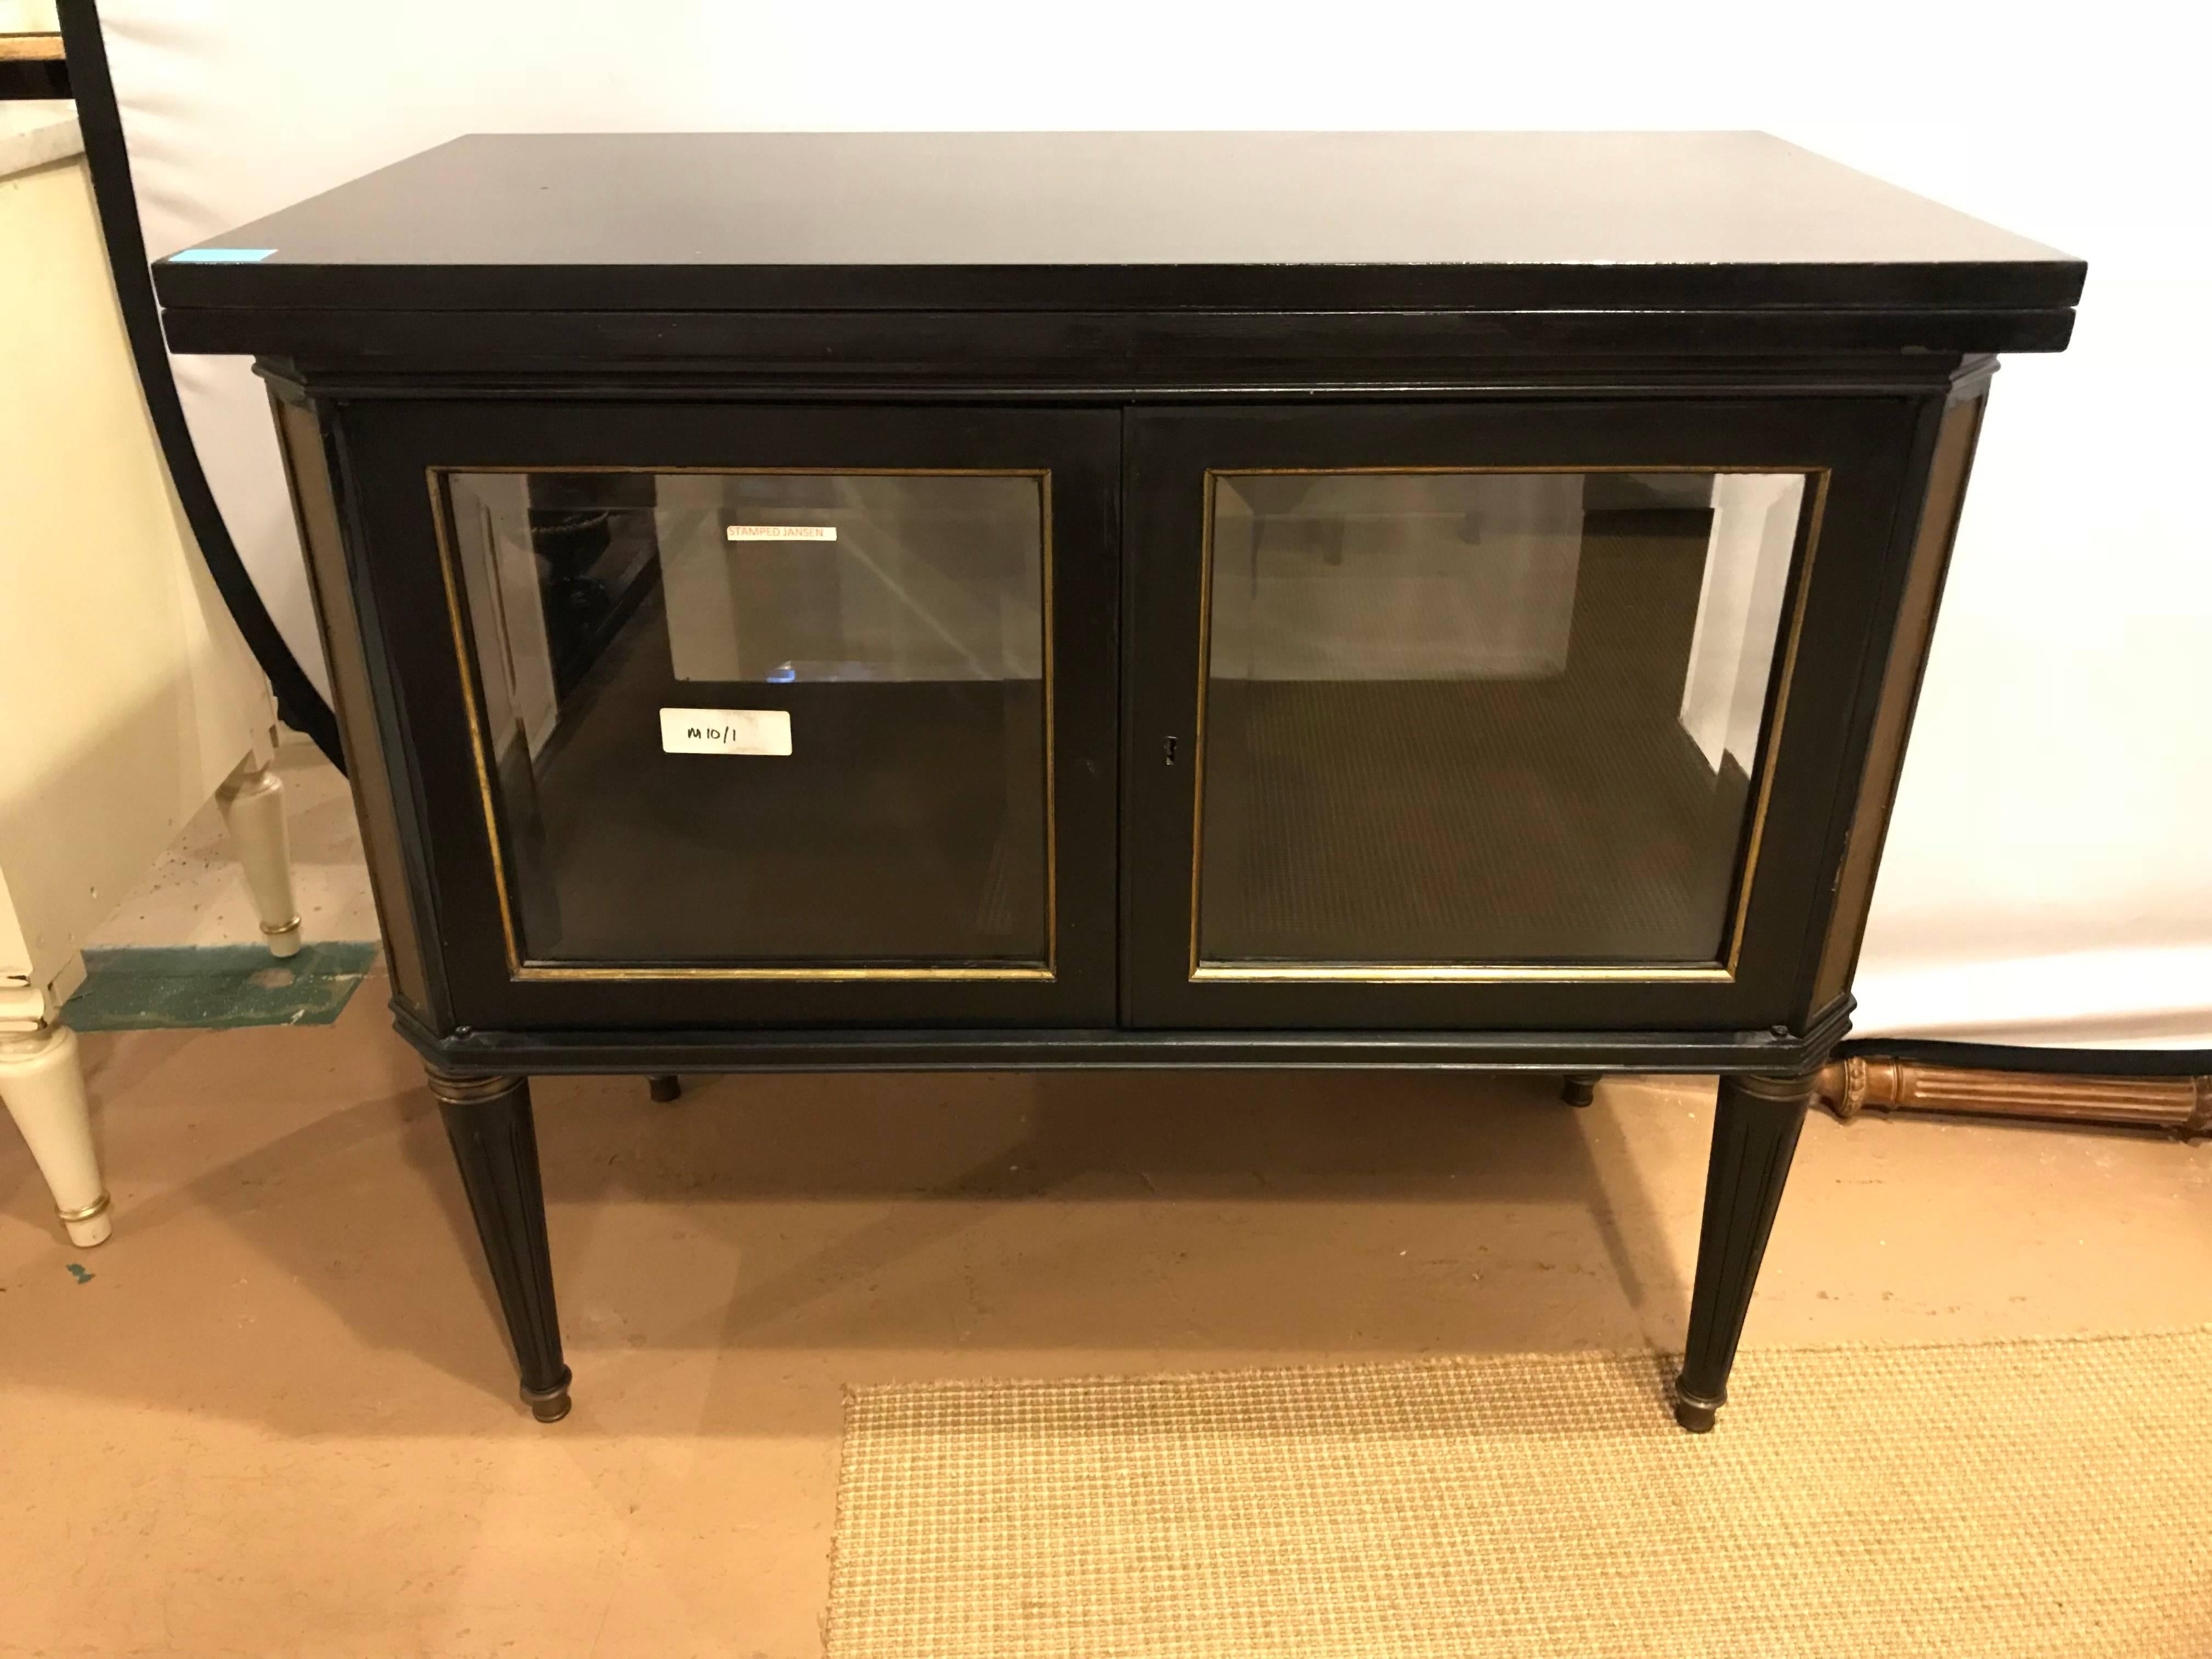 A Maison Jansen bronze-mounted Vitrine Server. This fine Hollywood Regency server has a flip-top that extends to a small dining table or server. The beveled glass front pair of doors with beveled sides display a vitrine or bar cart setting. The